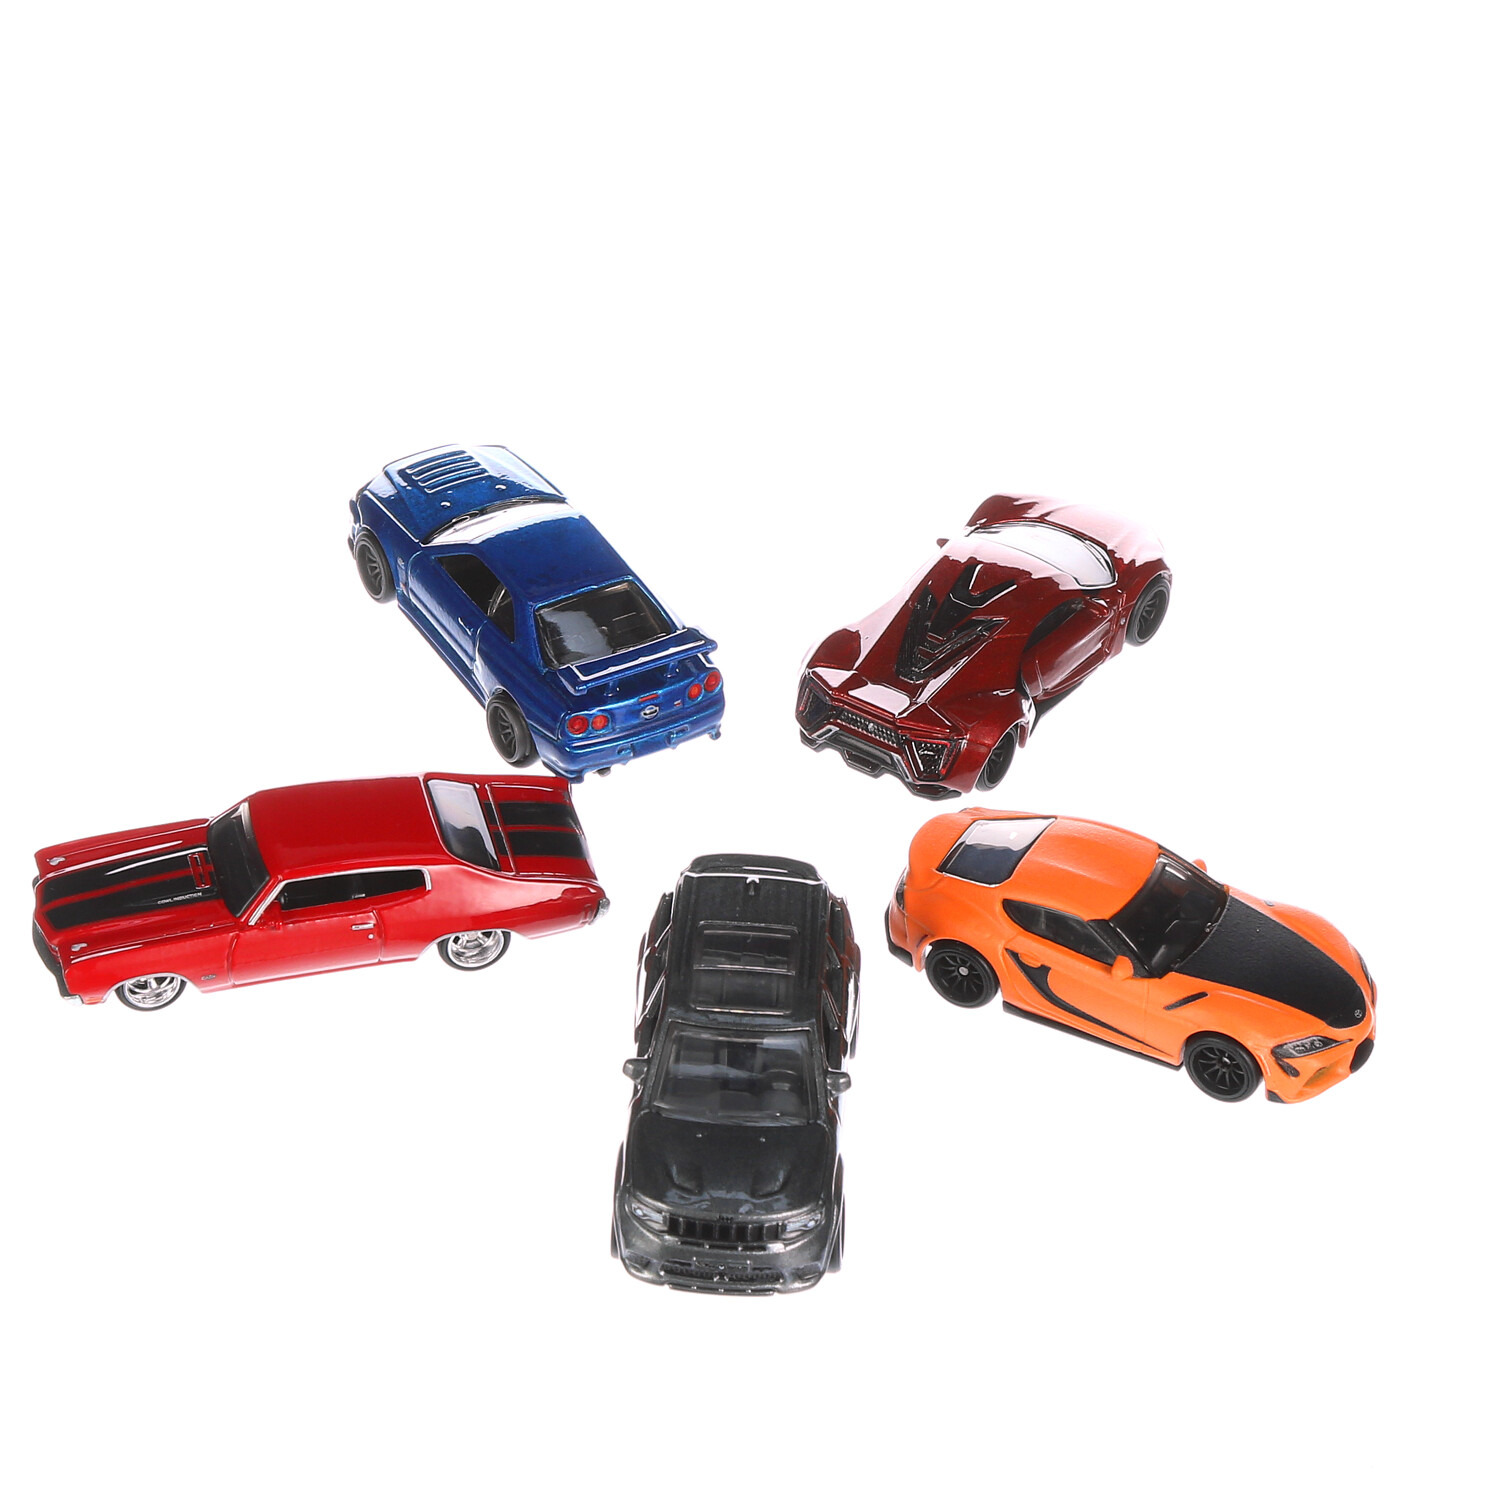 Hot Wheels Fast & Furious Premium Bundle of 5 1:64 Scale Toy Cars Inspired  By Fast Films